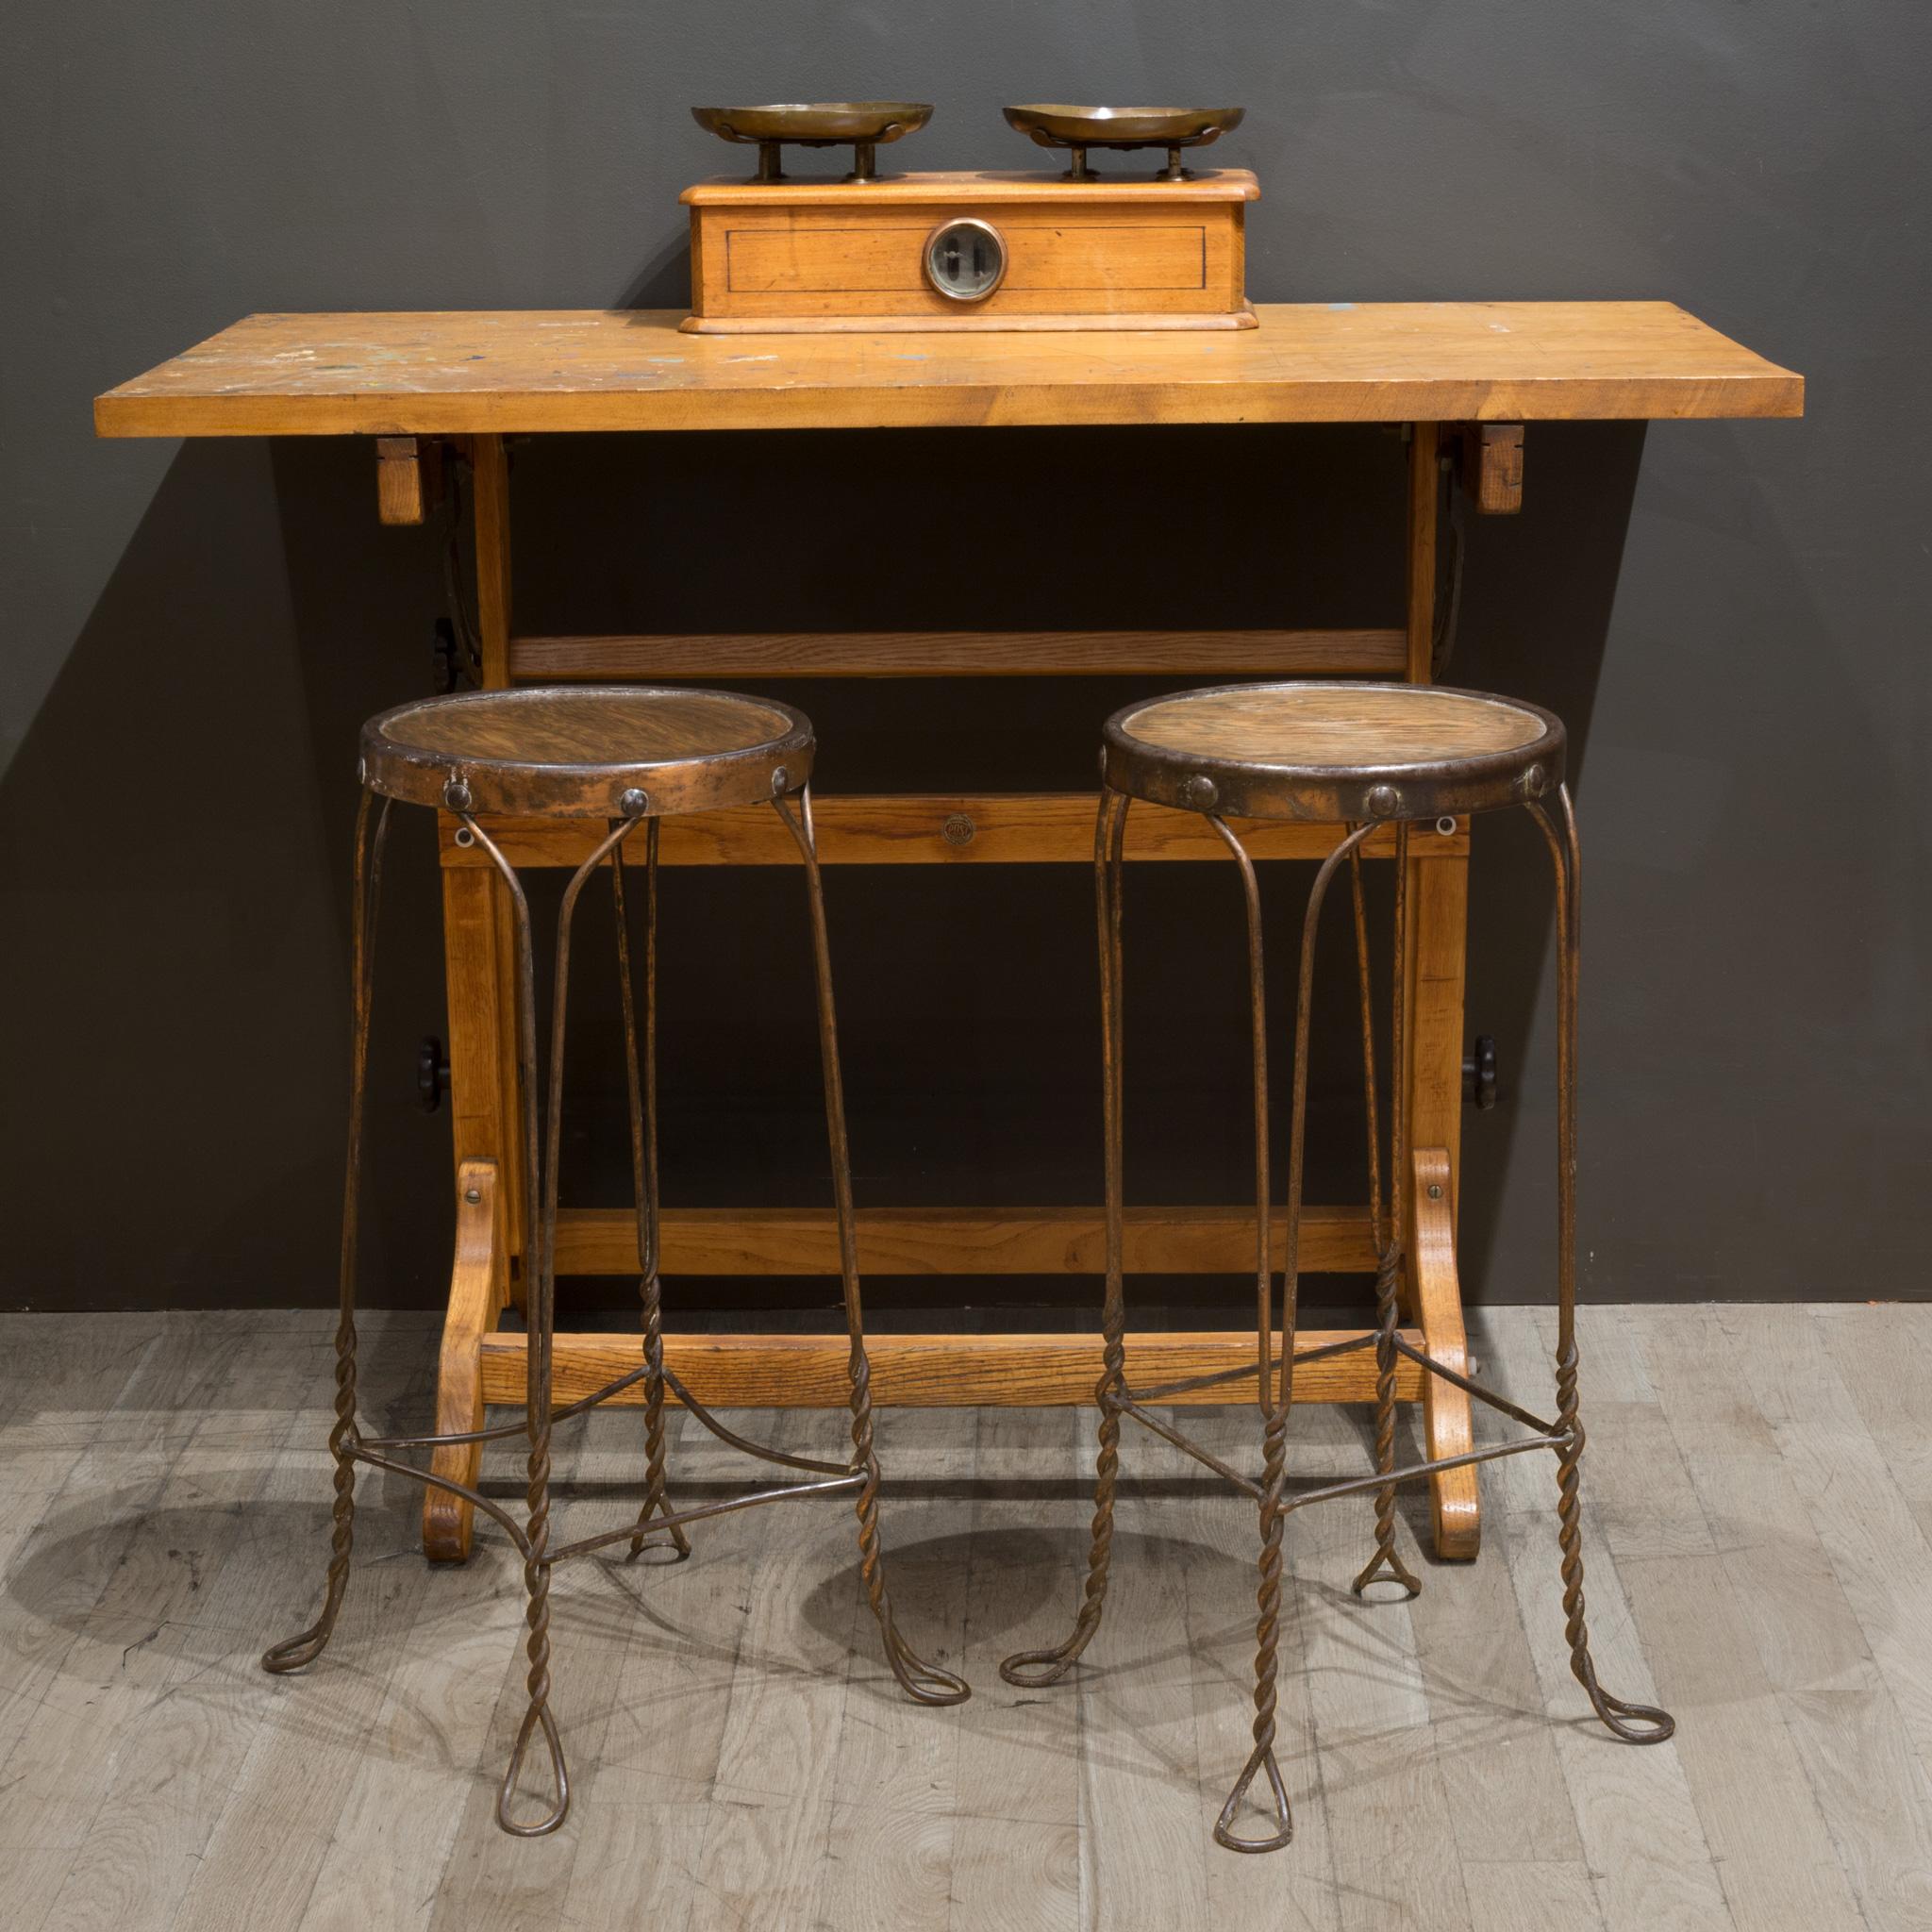 A pair of original antique American four-legged wrought iron ice cream parlor or soda fountain stationary bar stools. The chairs are comprised of heavy gauge wrought iron with a copper plate. The twisted and hooped feet are structurally sound and